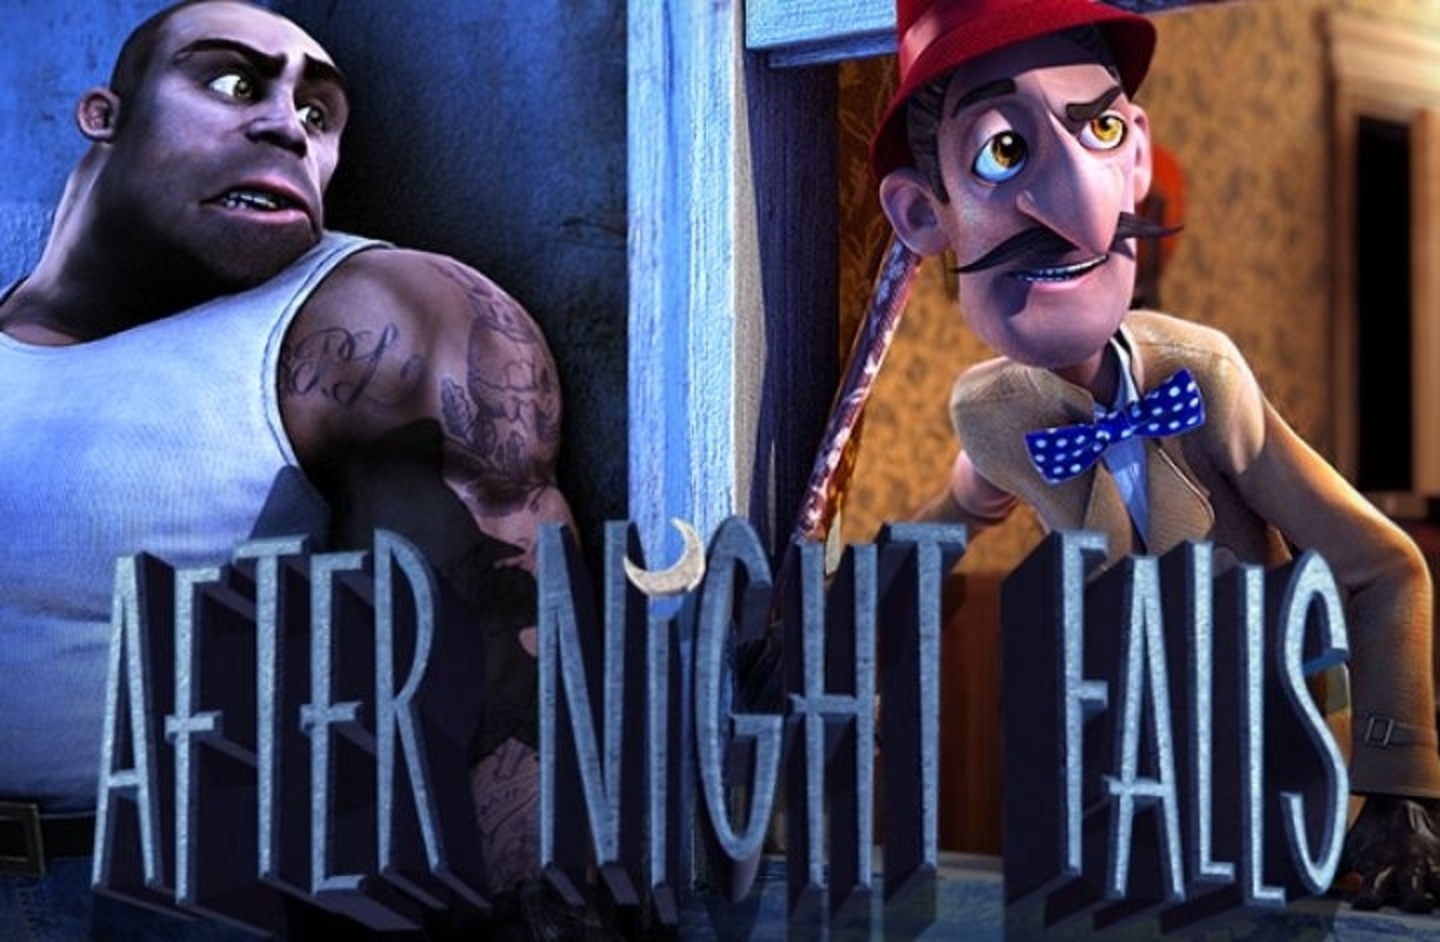 After Night Falls demo